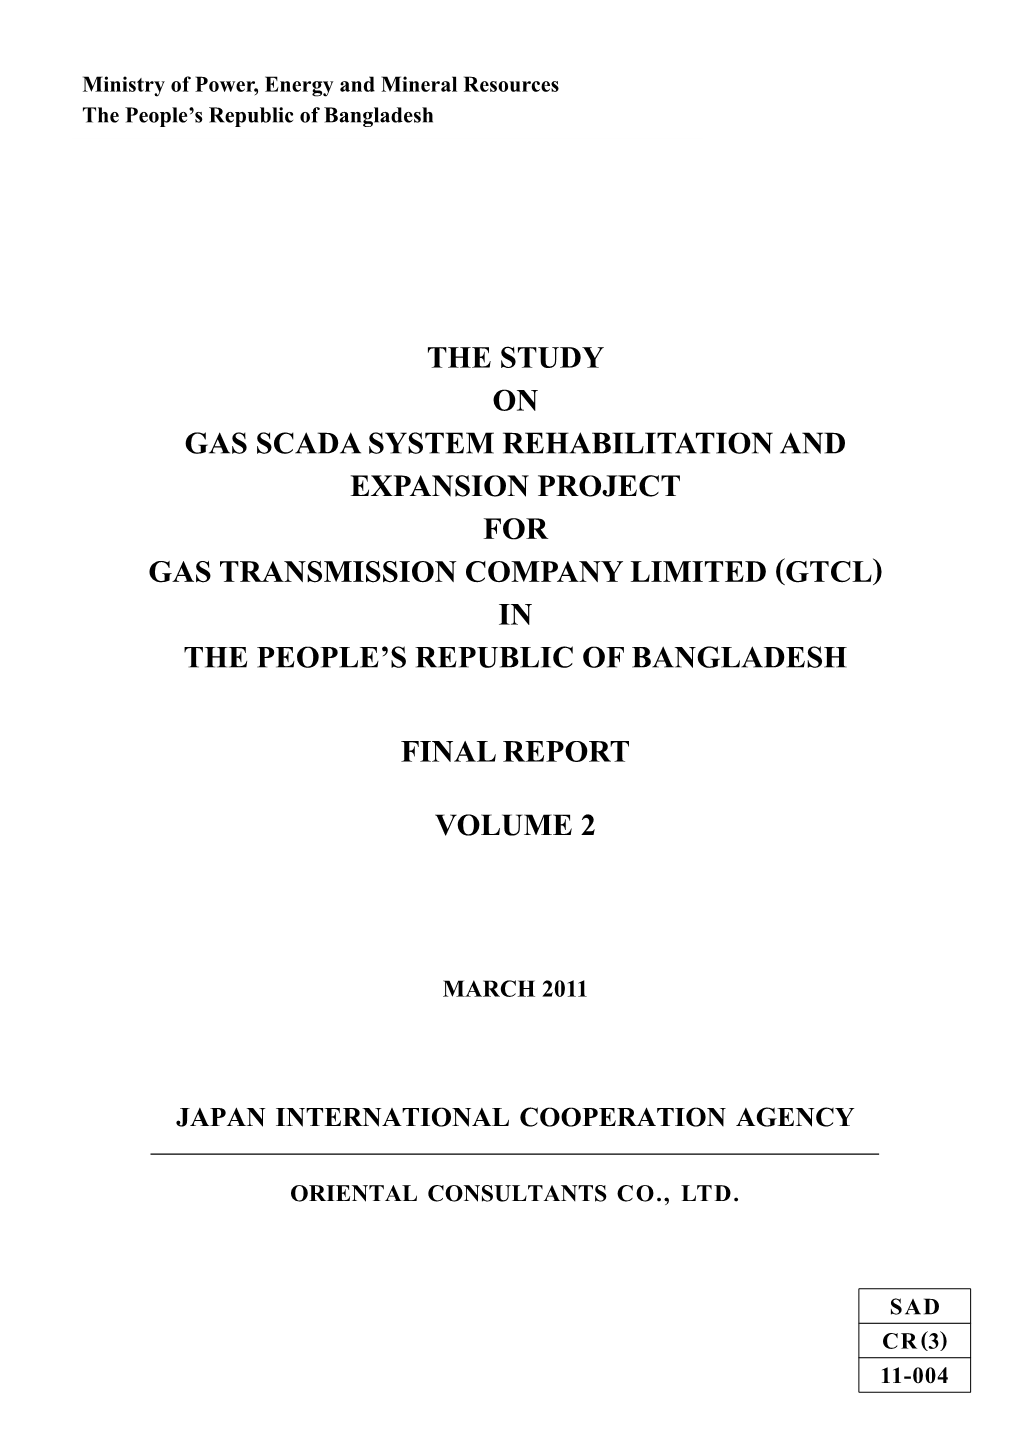 The Study on Gas Scada System Rehabilitation and Expansion Project for Gas Transmission Company Limited (Gtcl) in the People’S Republic of Bangladesh